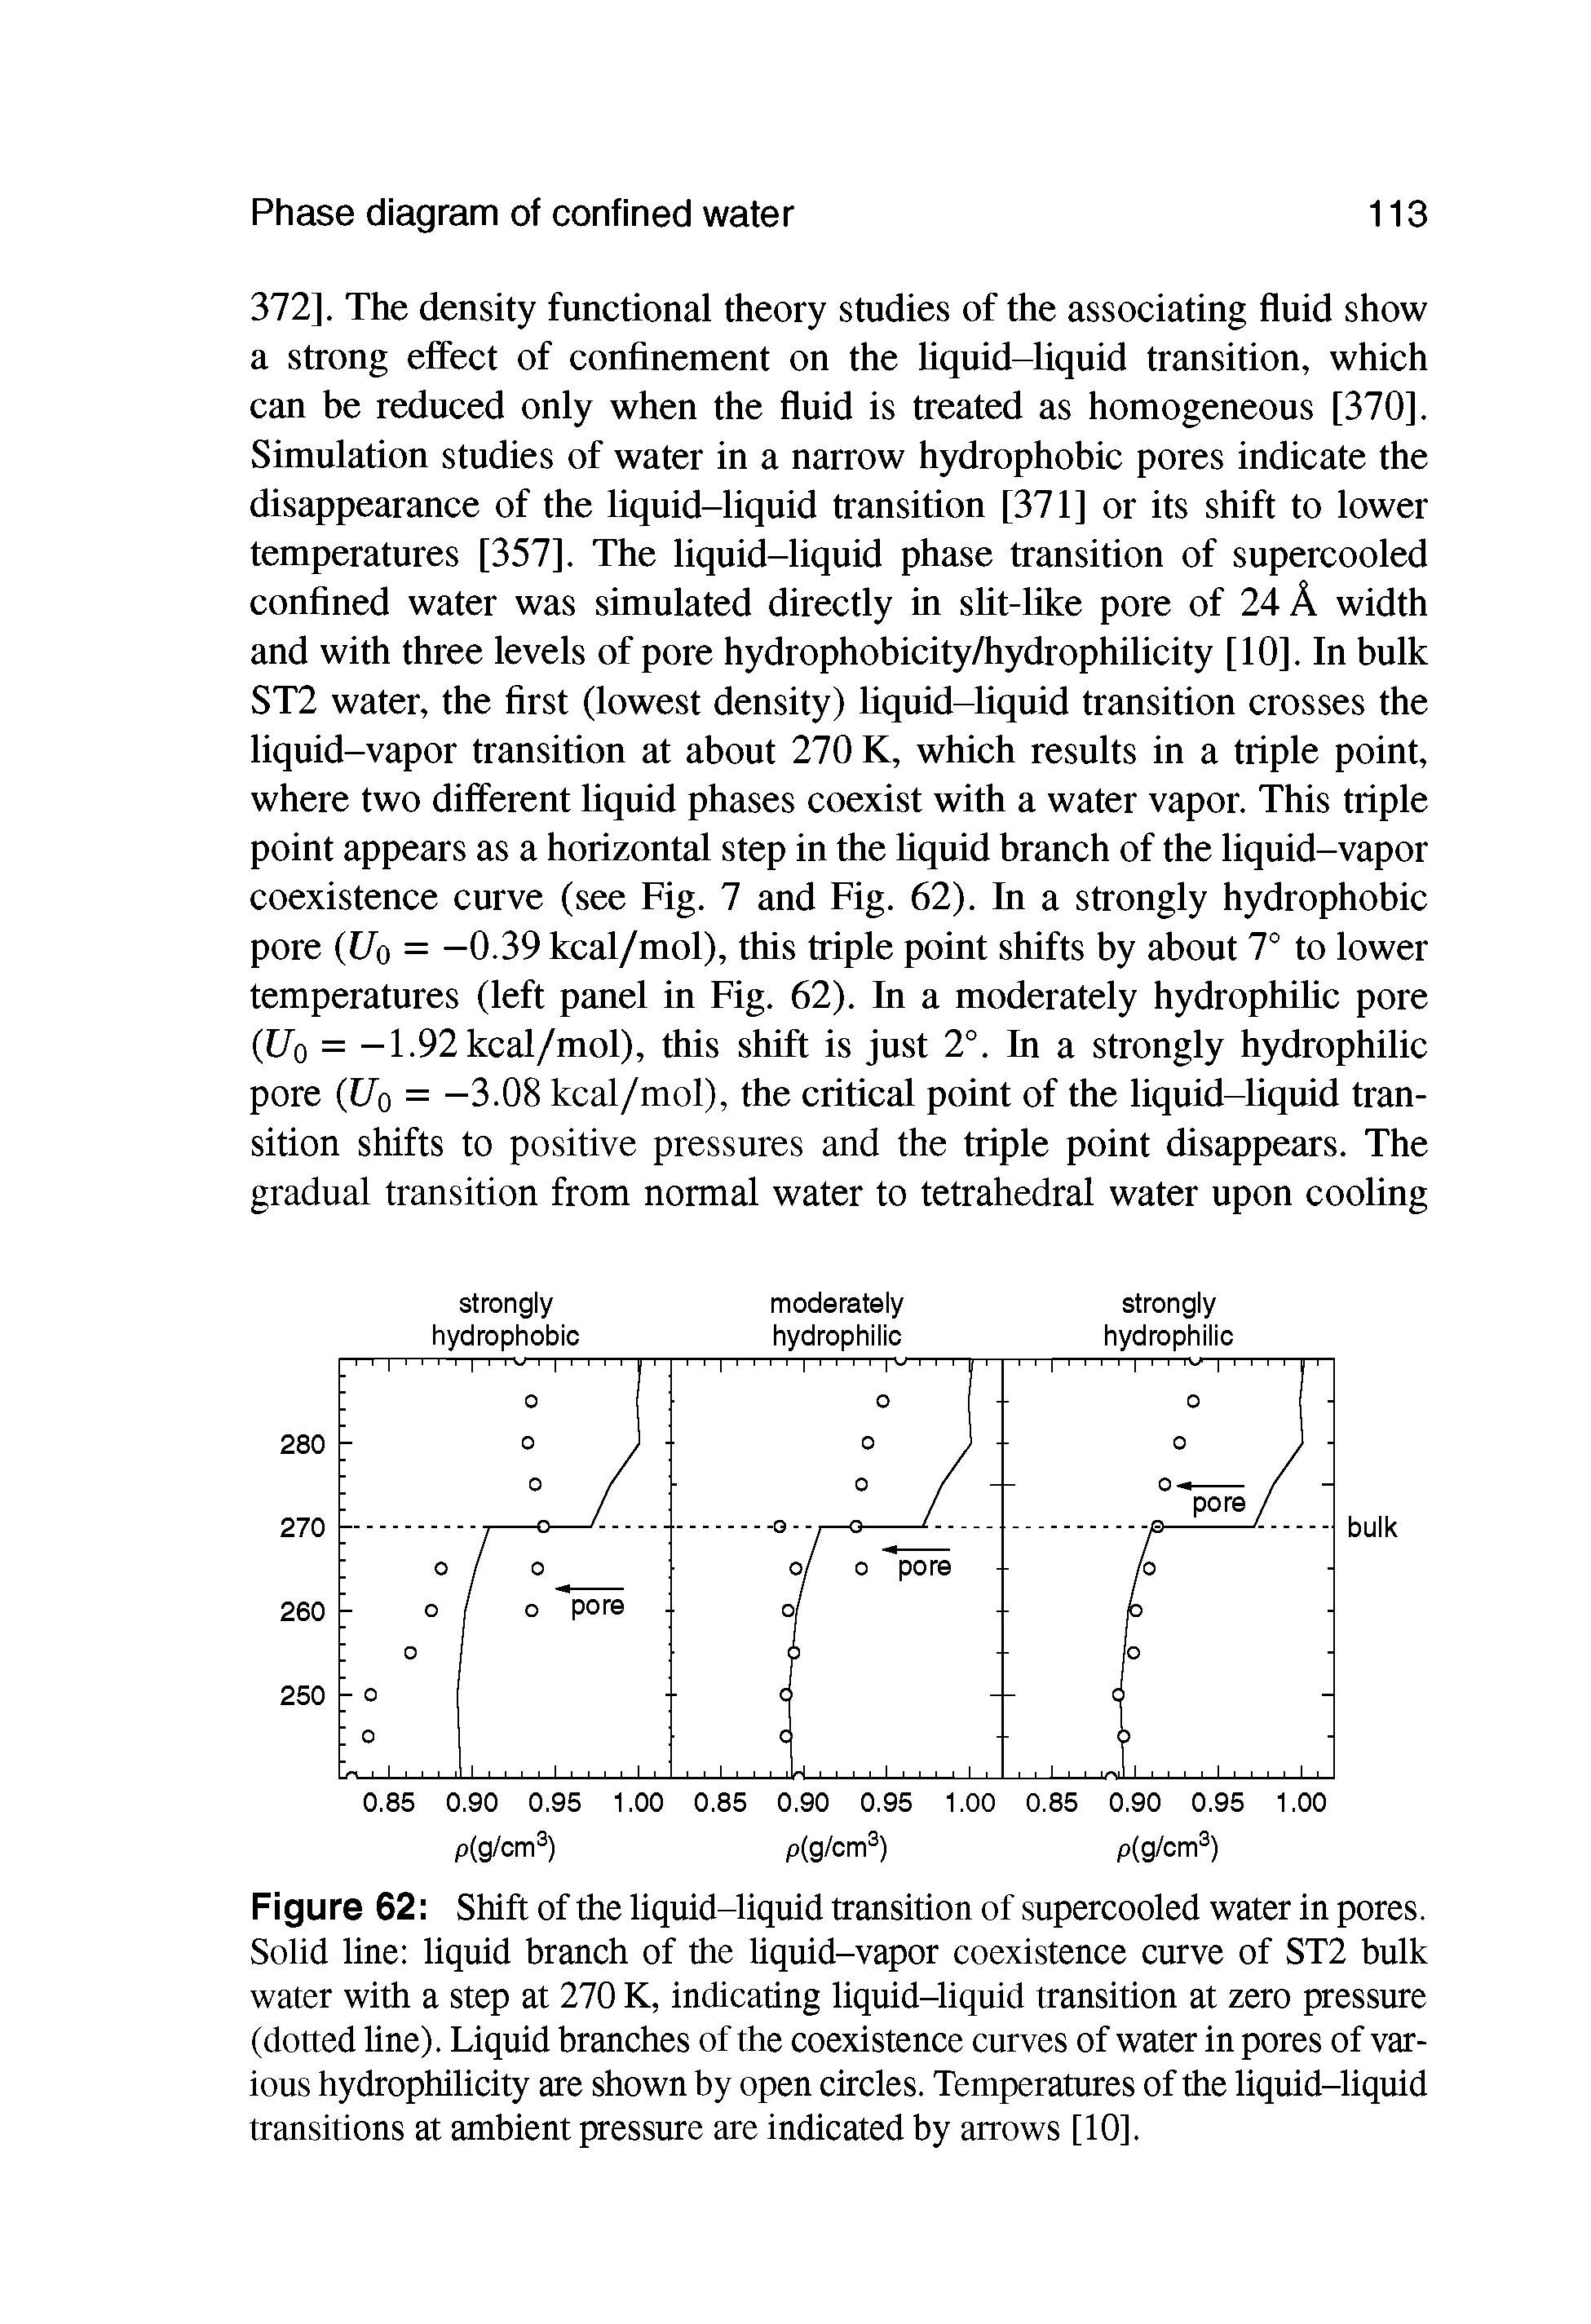 Figure 62 Shift of the liquid-liquid transition of supercooled water in pores. Solid line liquid branch of the Uquid-vapor coexistence curve of ST2 bulk water with a step at 270 K, indicating liquid-liquid transition at zero pressure (dotted line). Liquid branches of the coexistence curves of water in pores of various hydrophilicity are shown by open circles. Temperatures of the liquid-liquid transitions at ambient pressure are indicated by arrows [10].